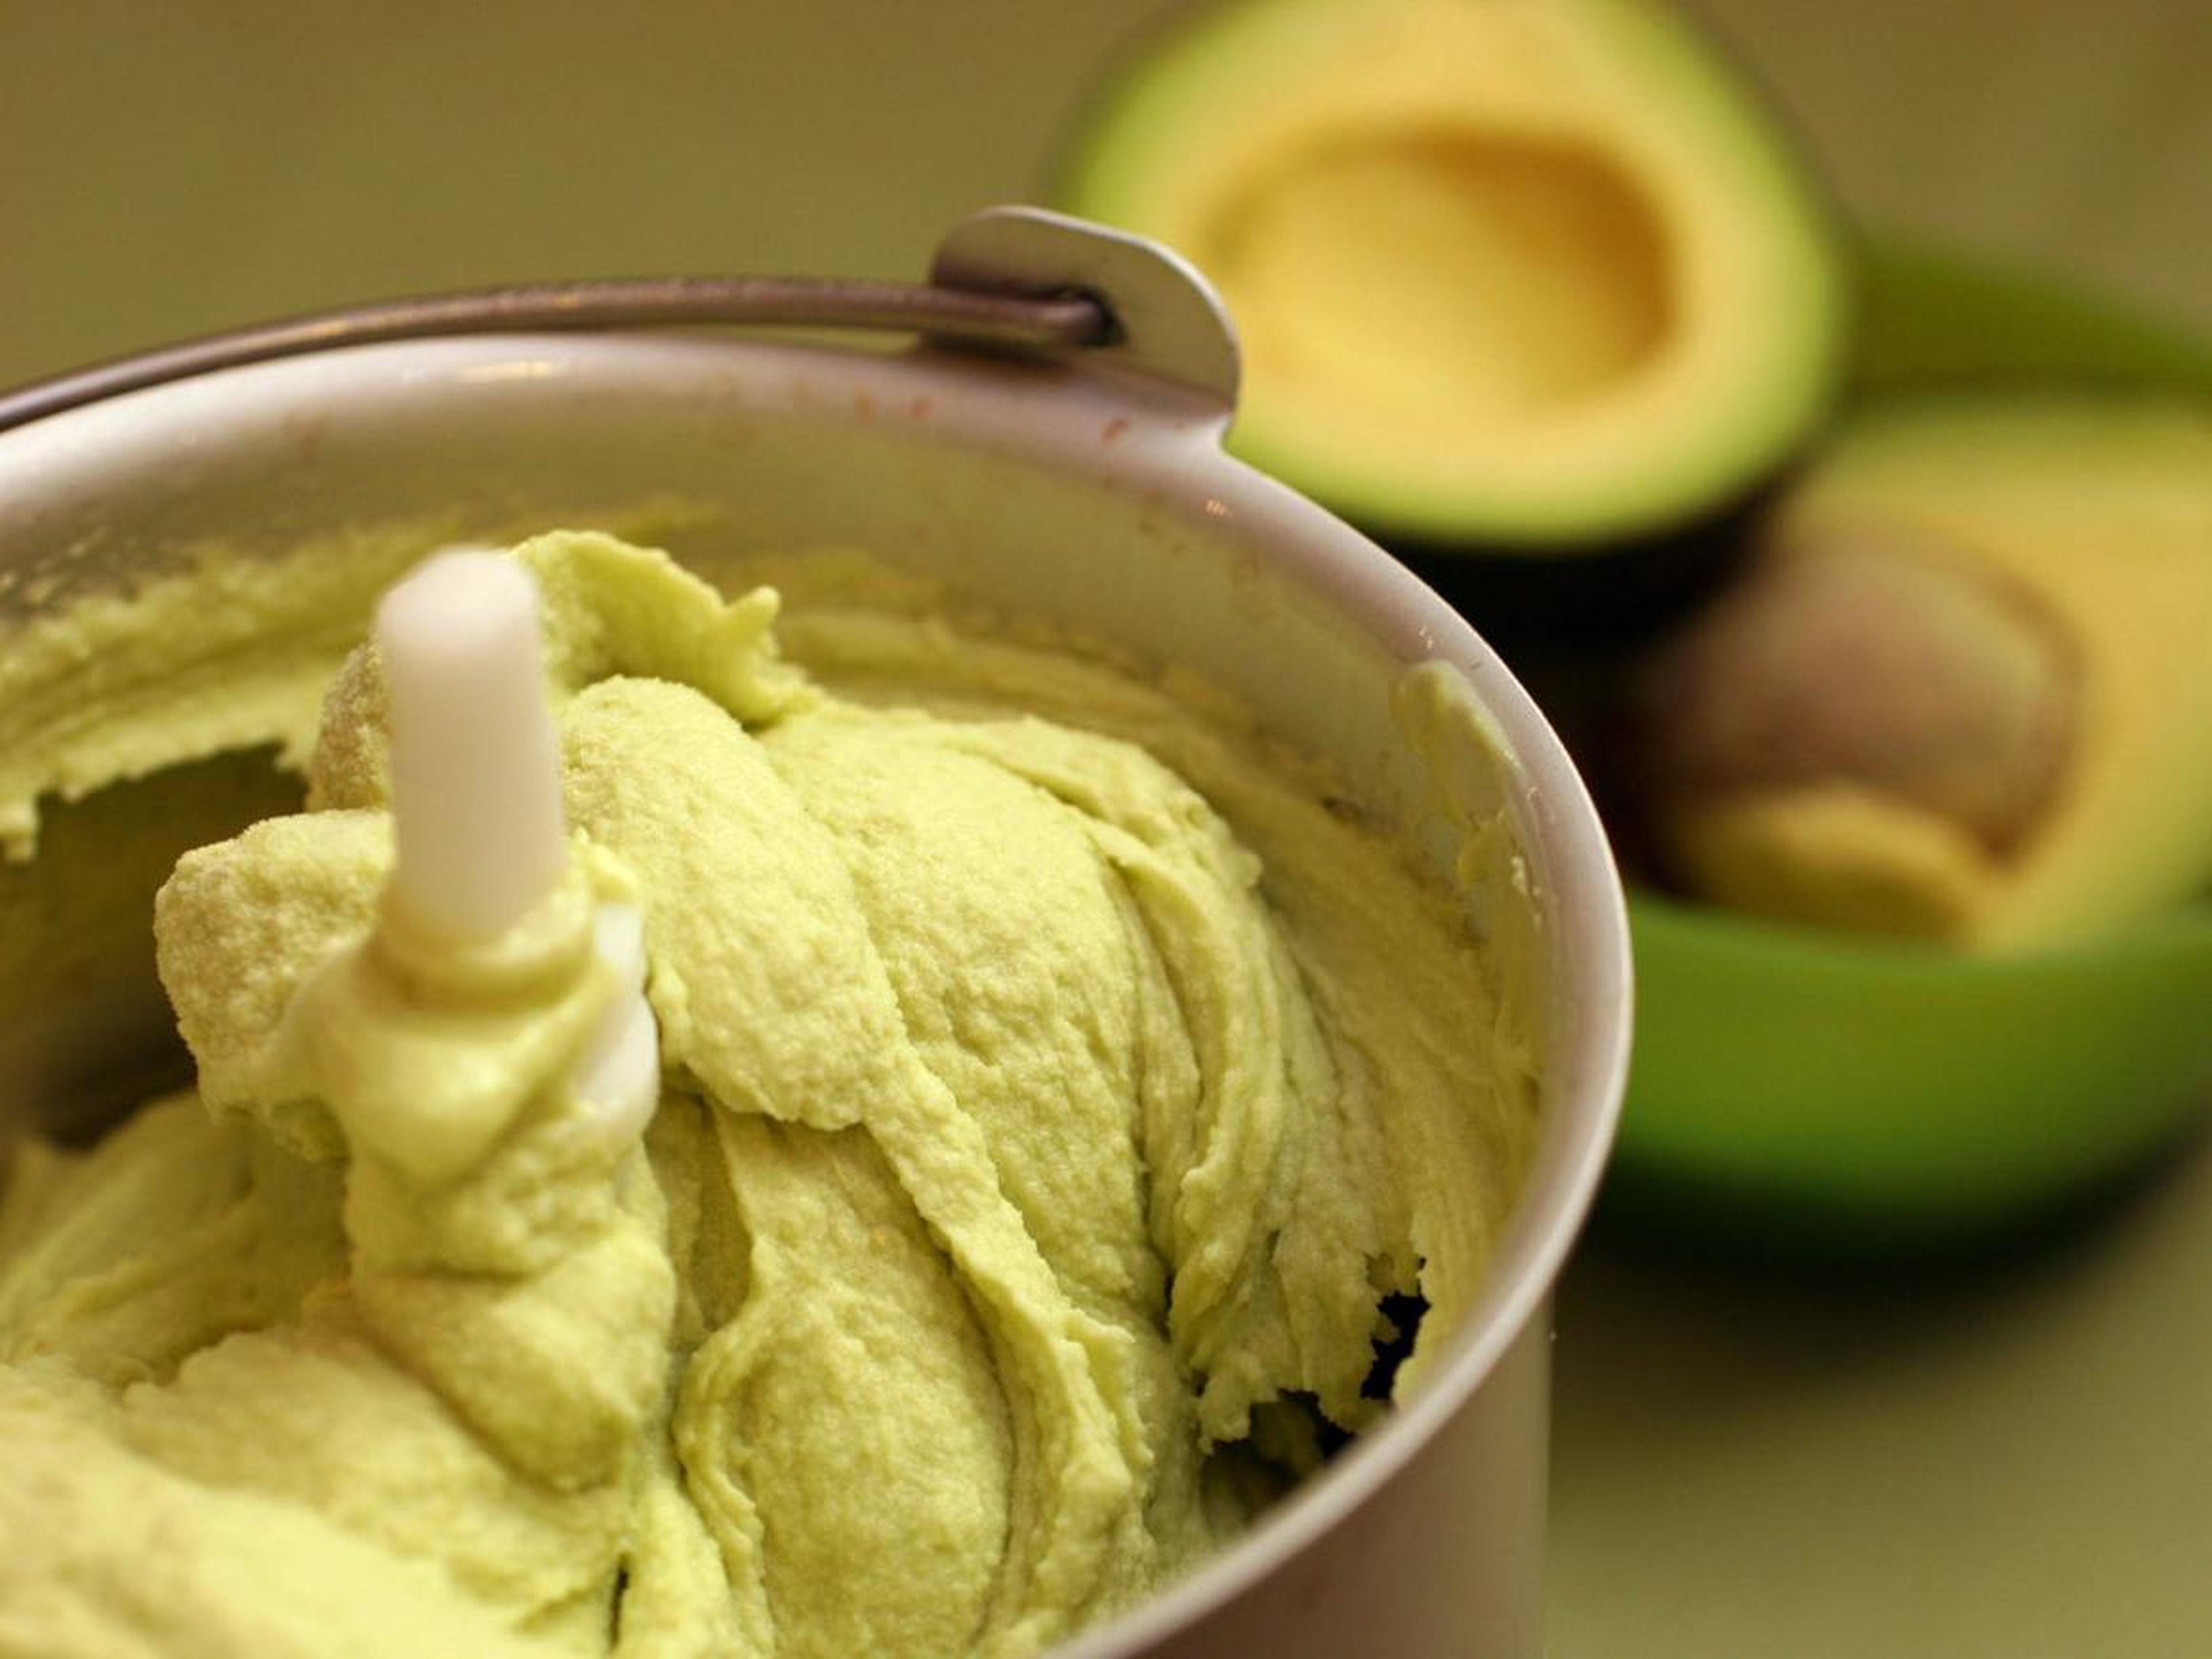 He's not big on dessert either — for him, avocado ice cream is a special treat.